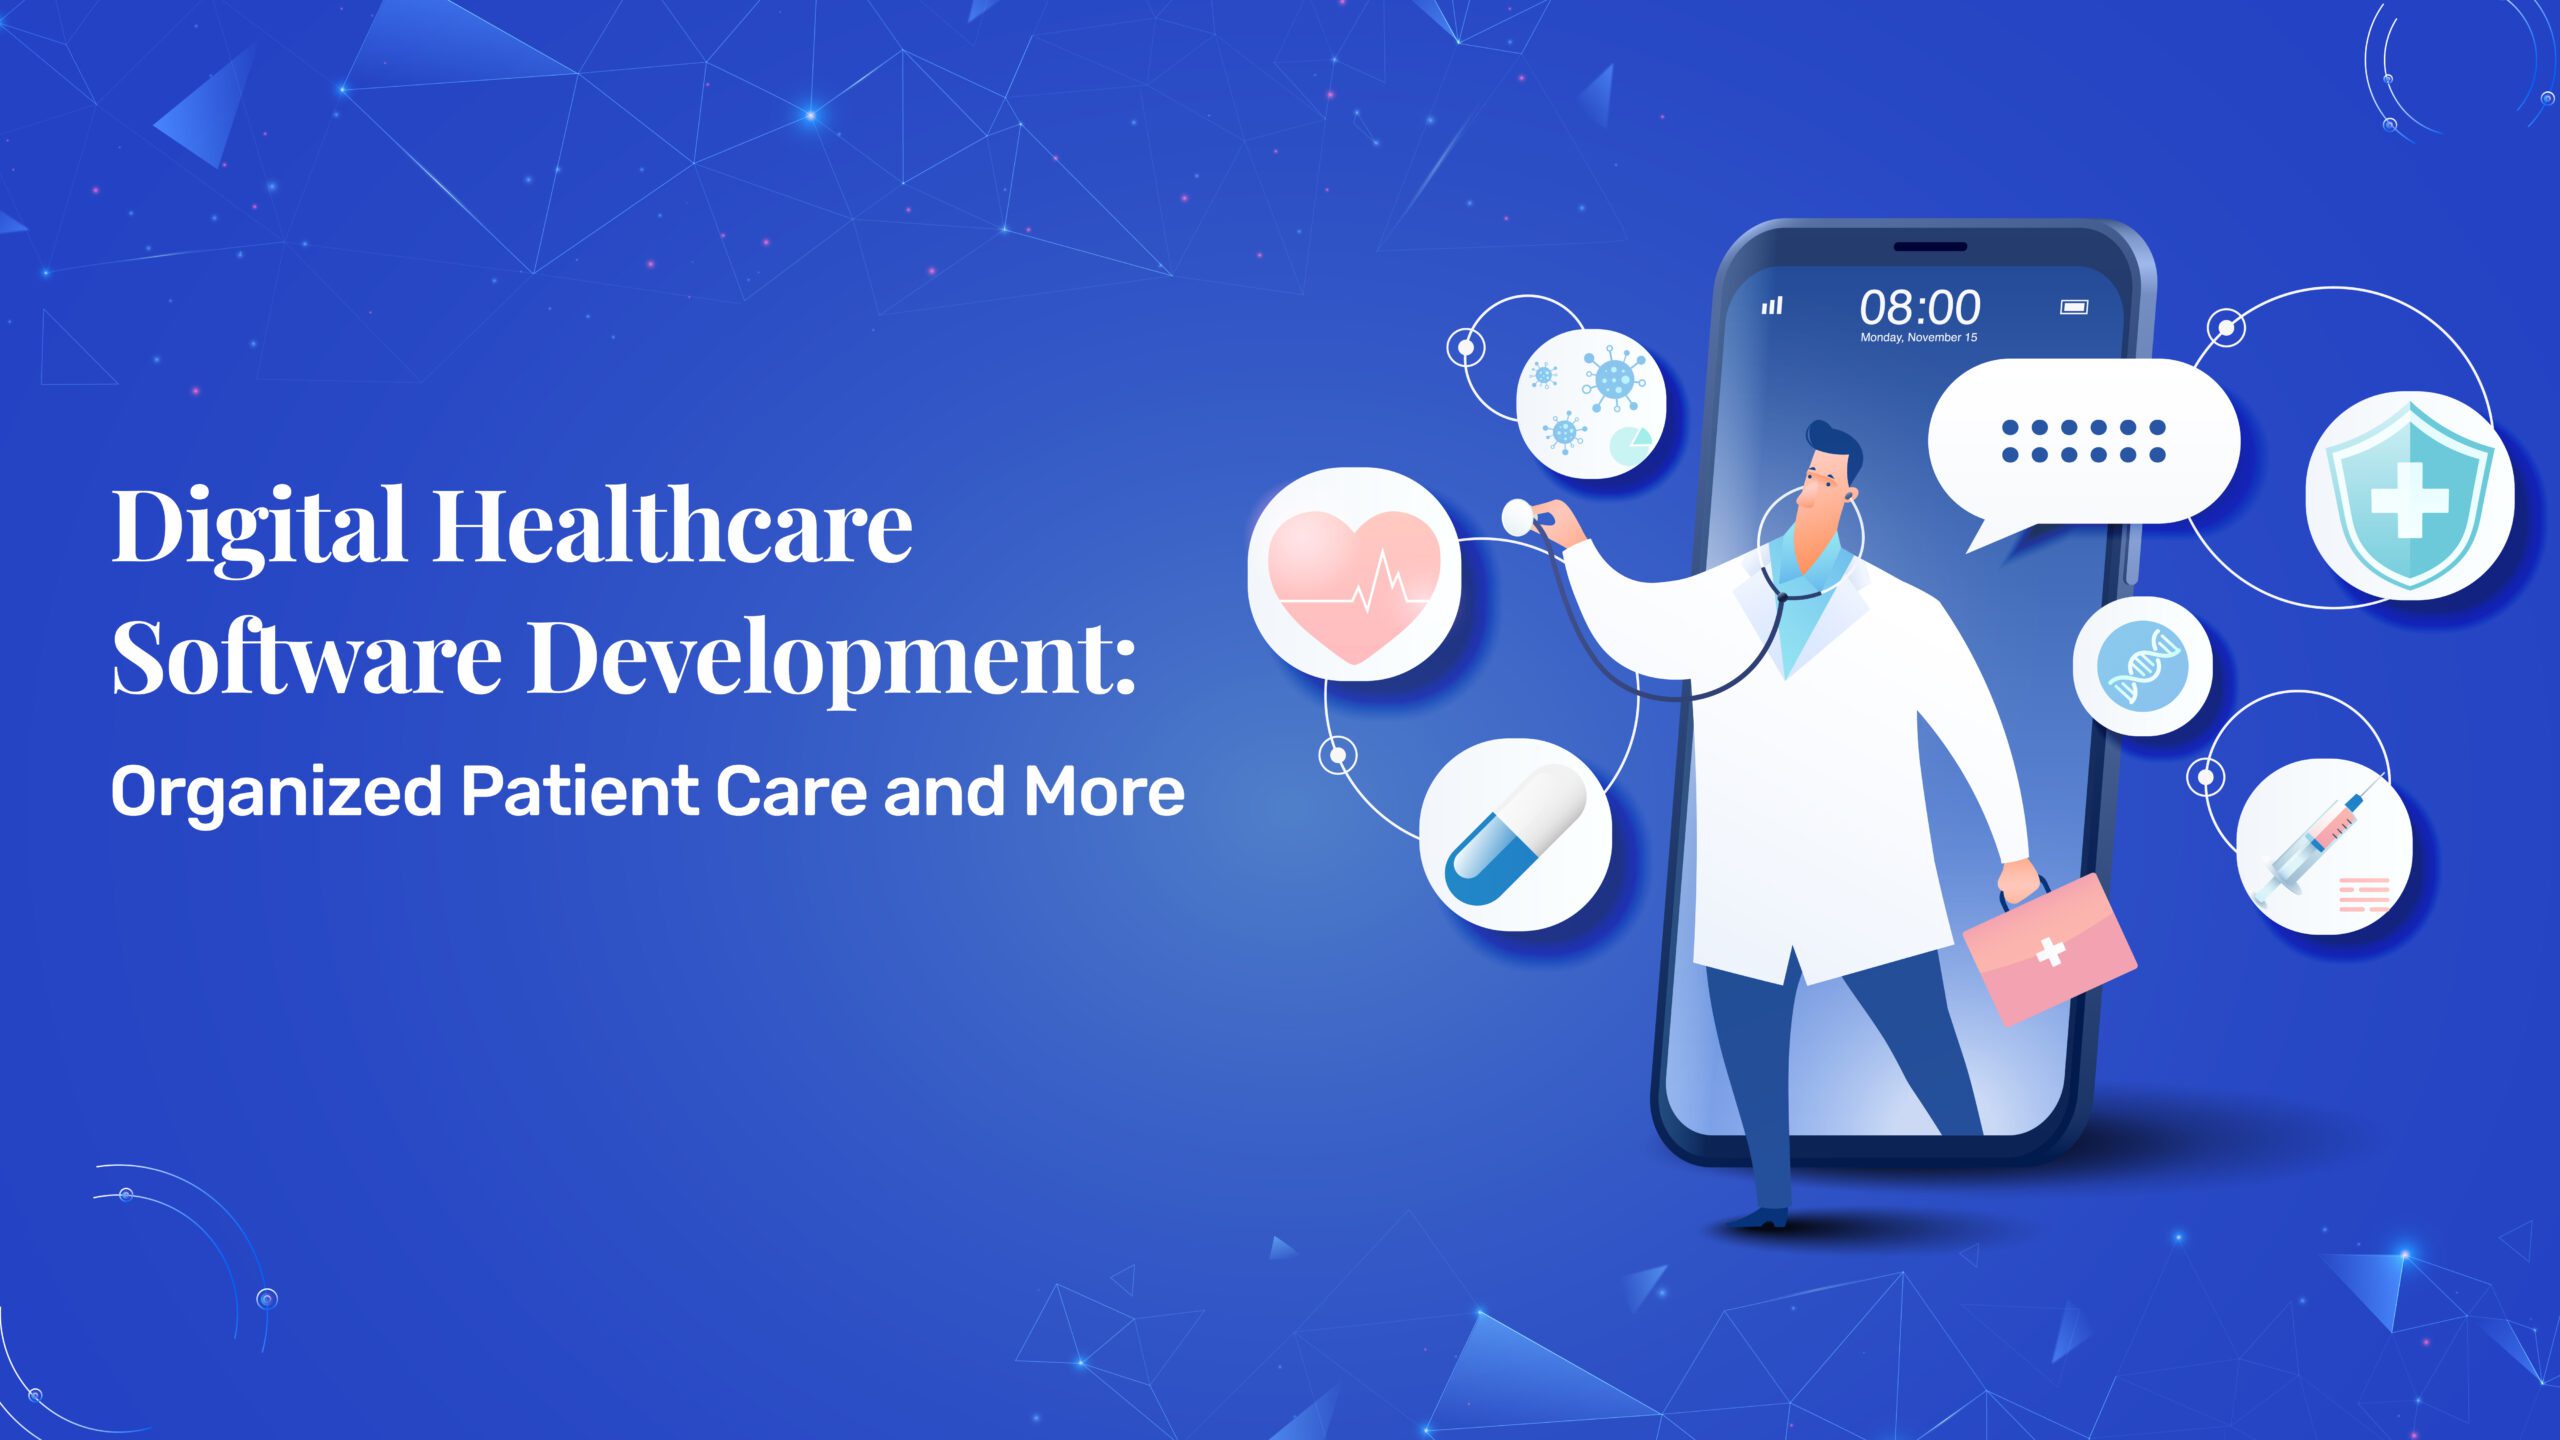 Digital Healthcare Software Development: Organized Patient Care and More